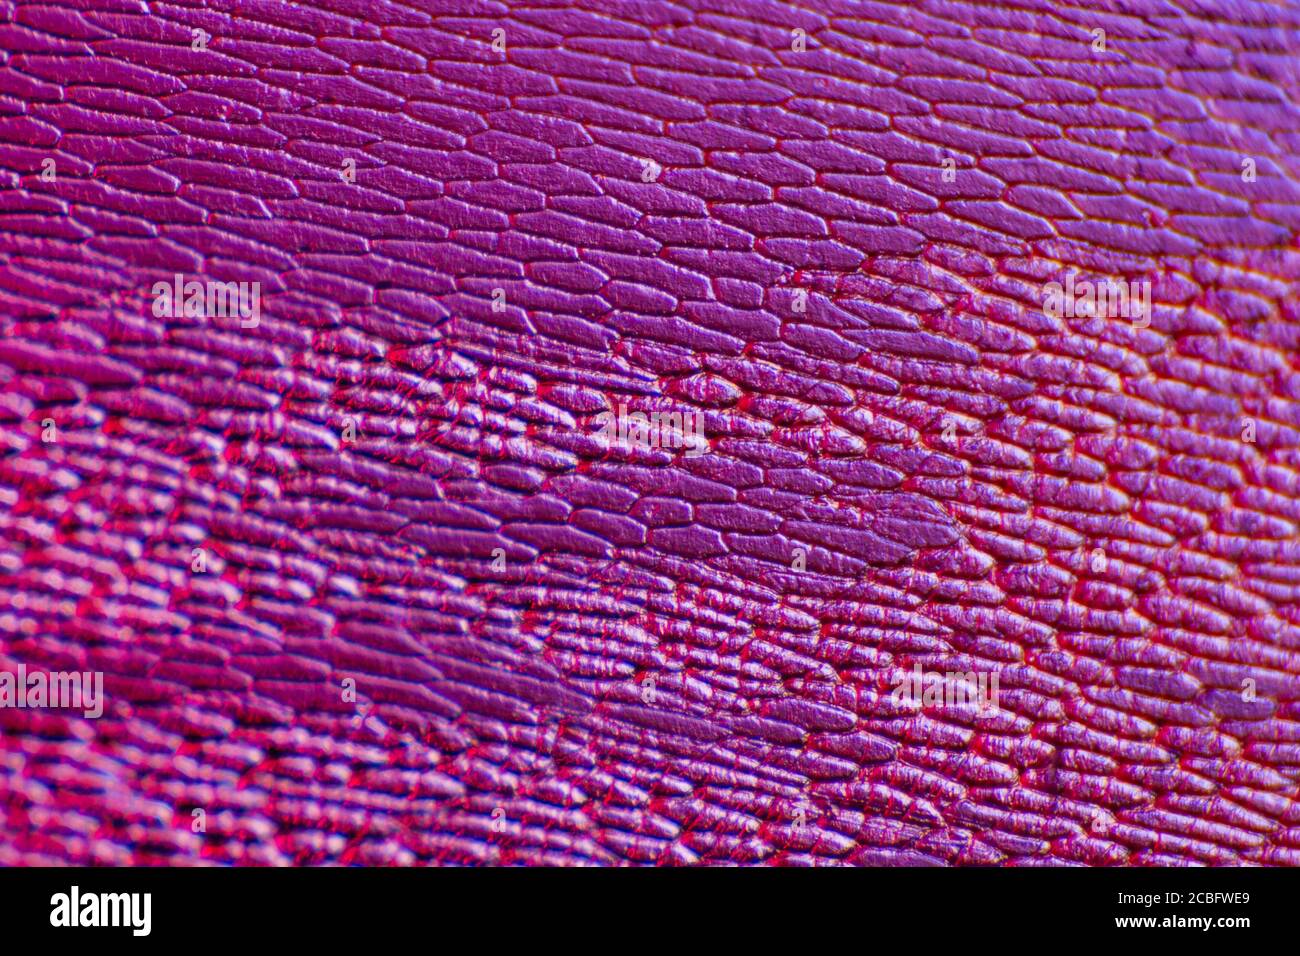 Onion epidermis with pigmented large cells. Clear epidermal cells of an onion. Suitable as abstact background. Stock Photo